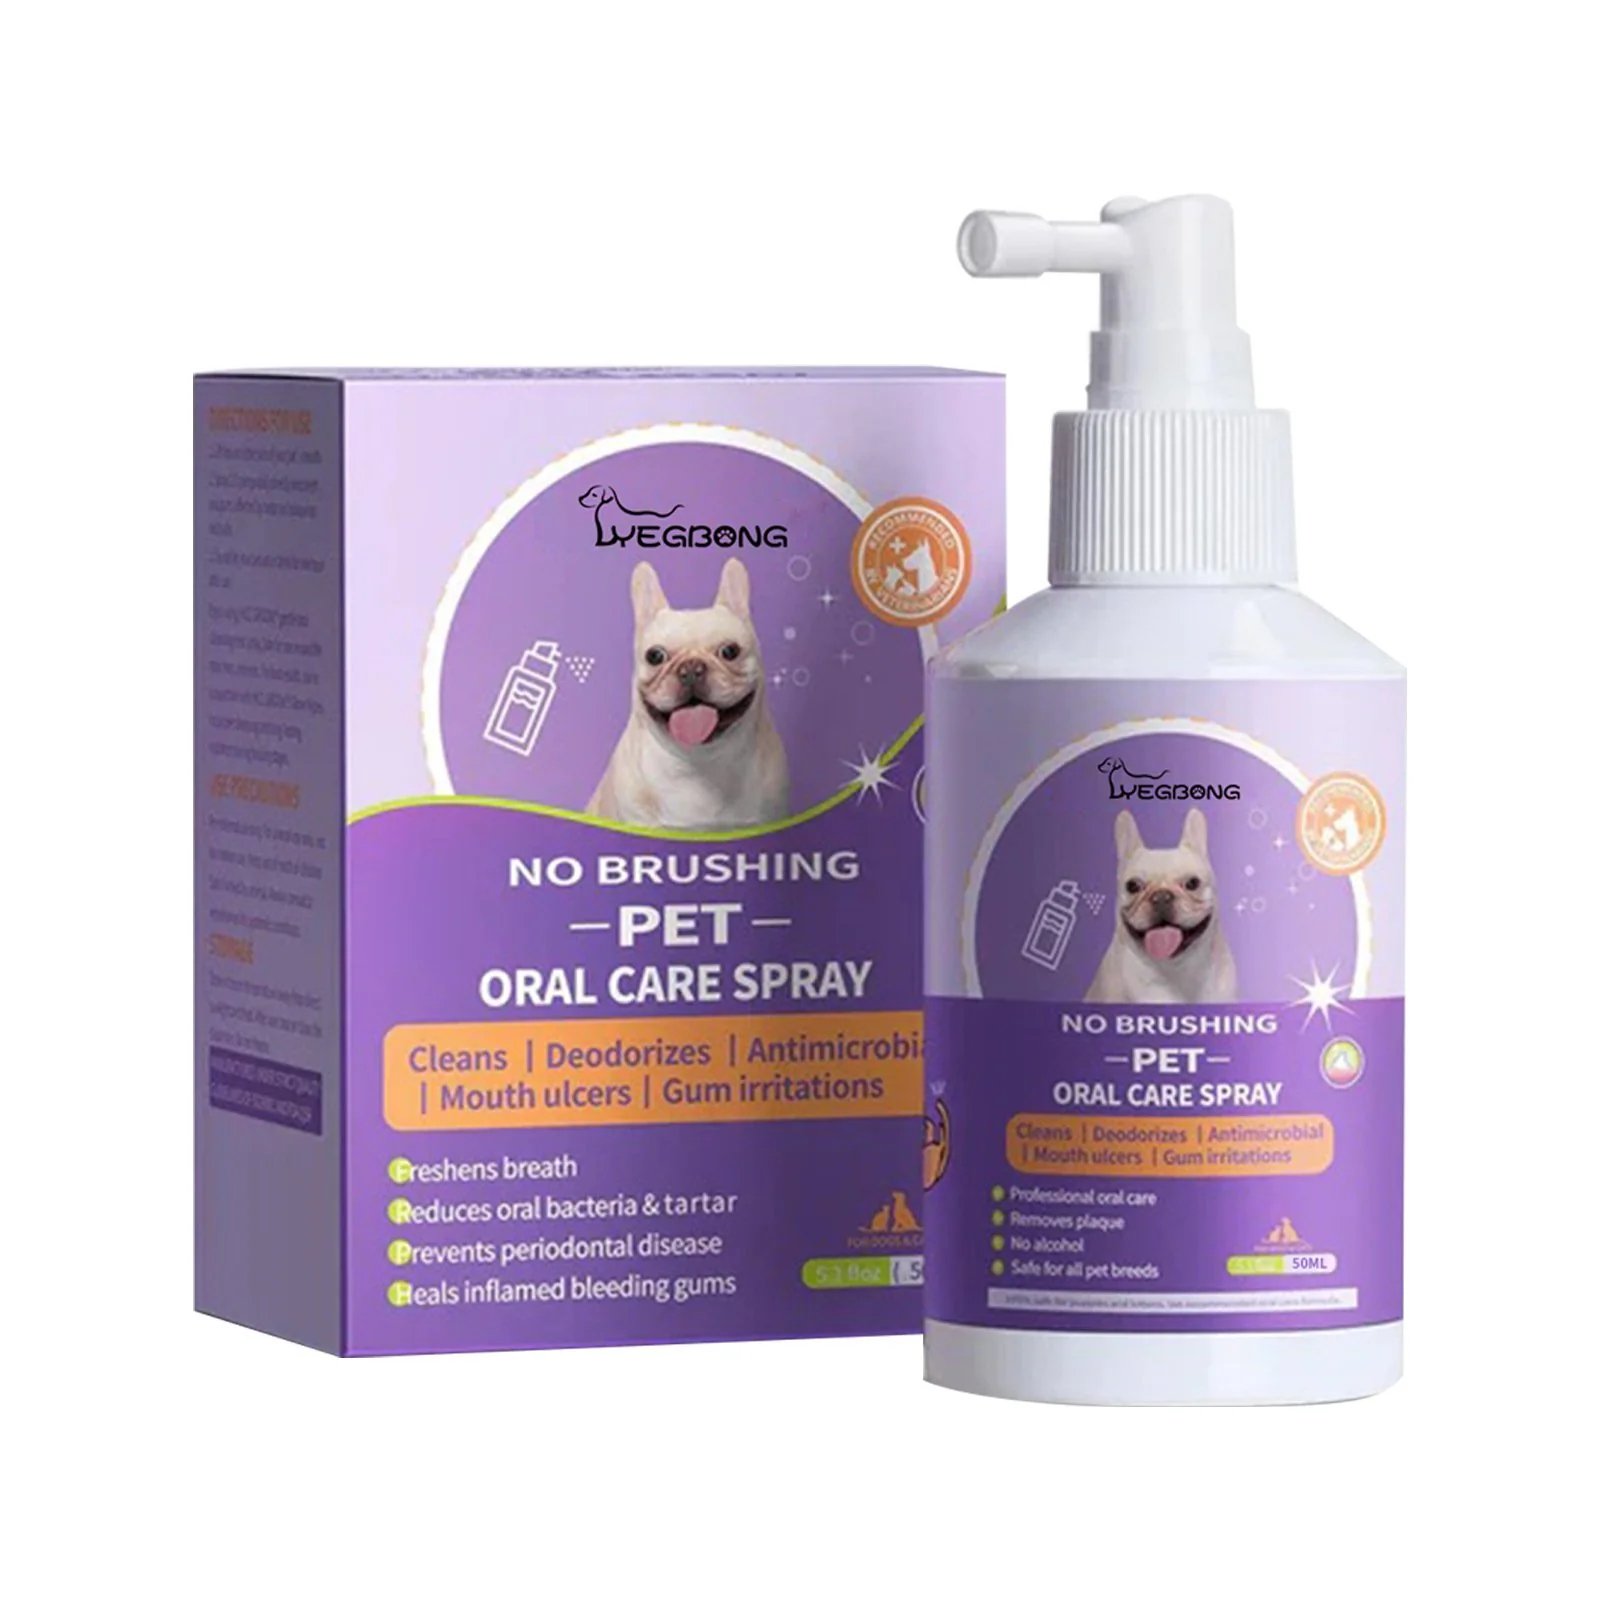 💥HOT SALE✨Teeth Cleaning Spray for Dogs & Cats🐶🐱